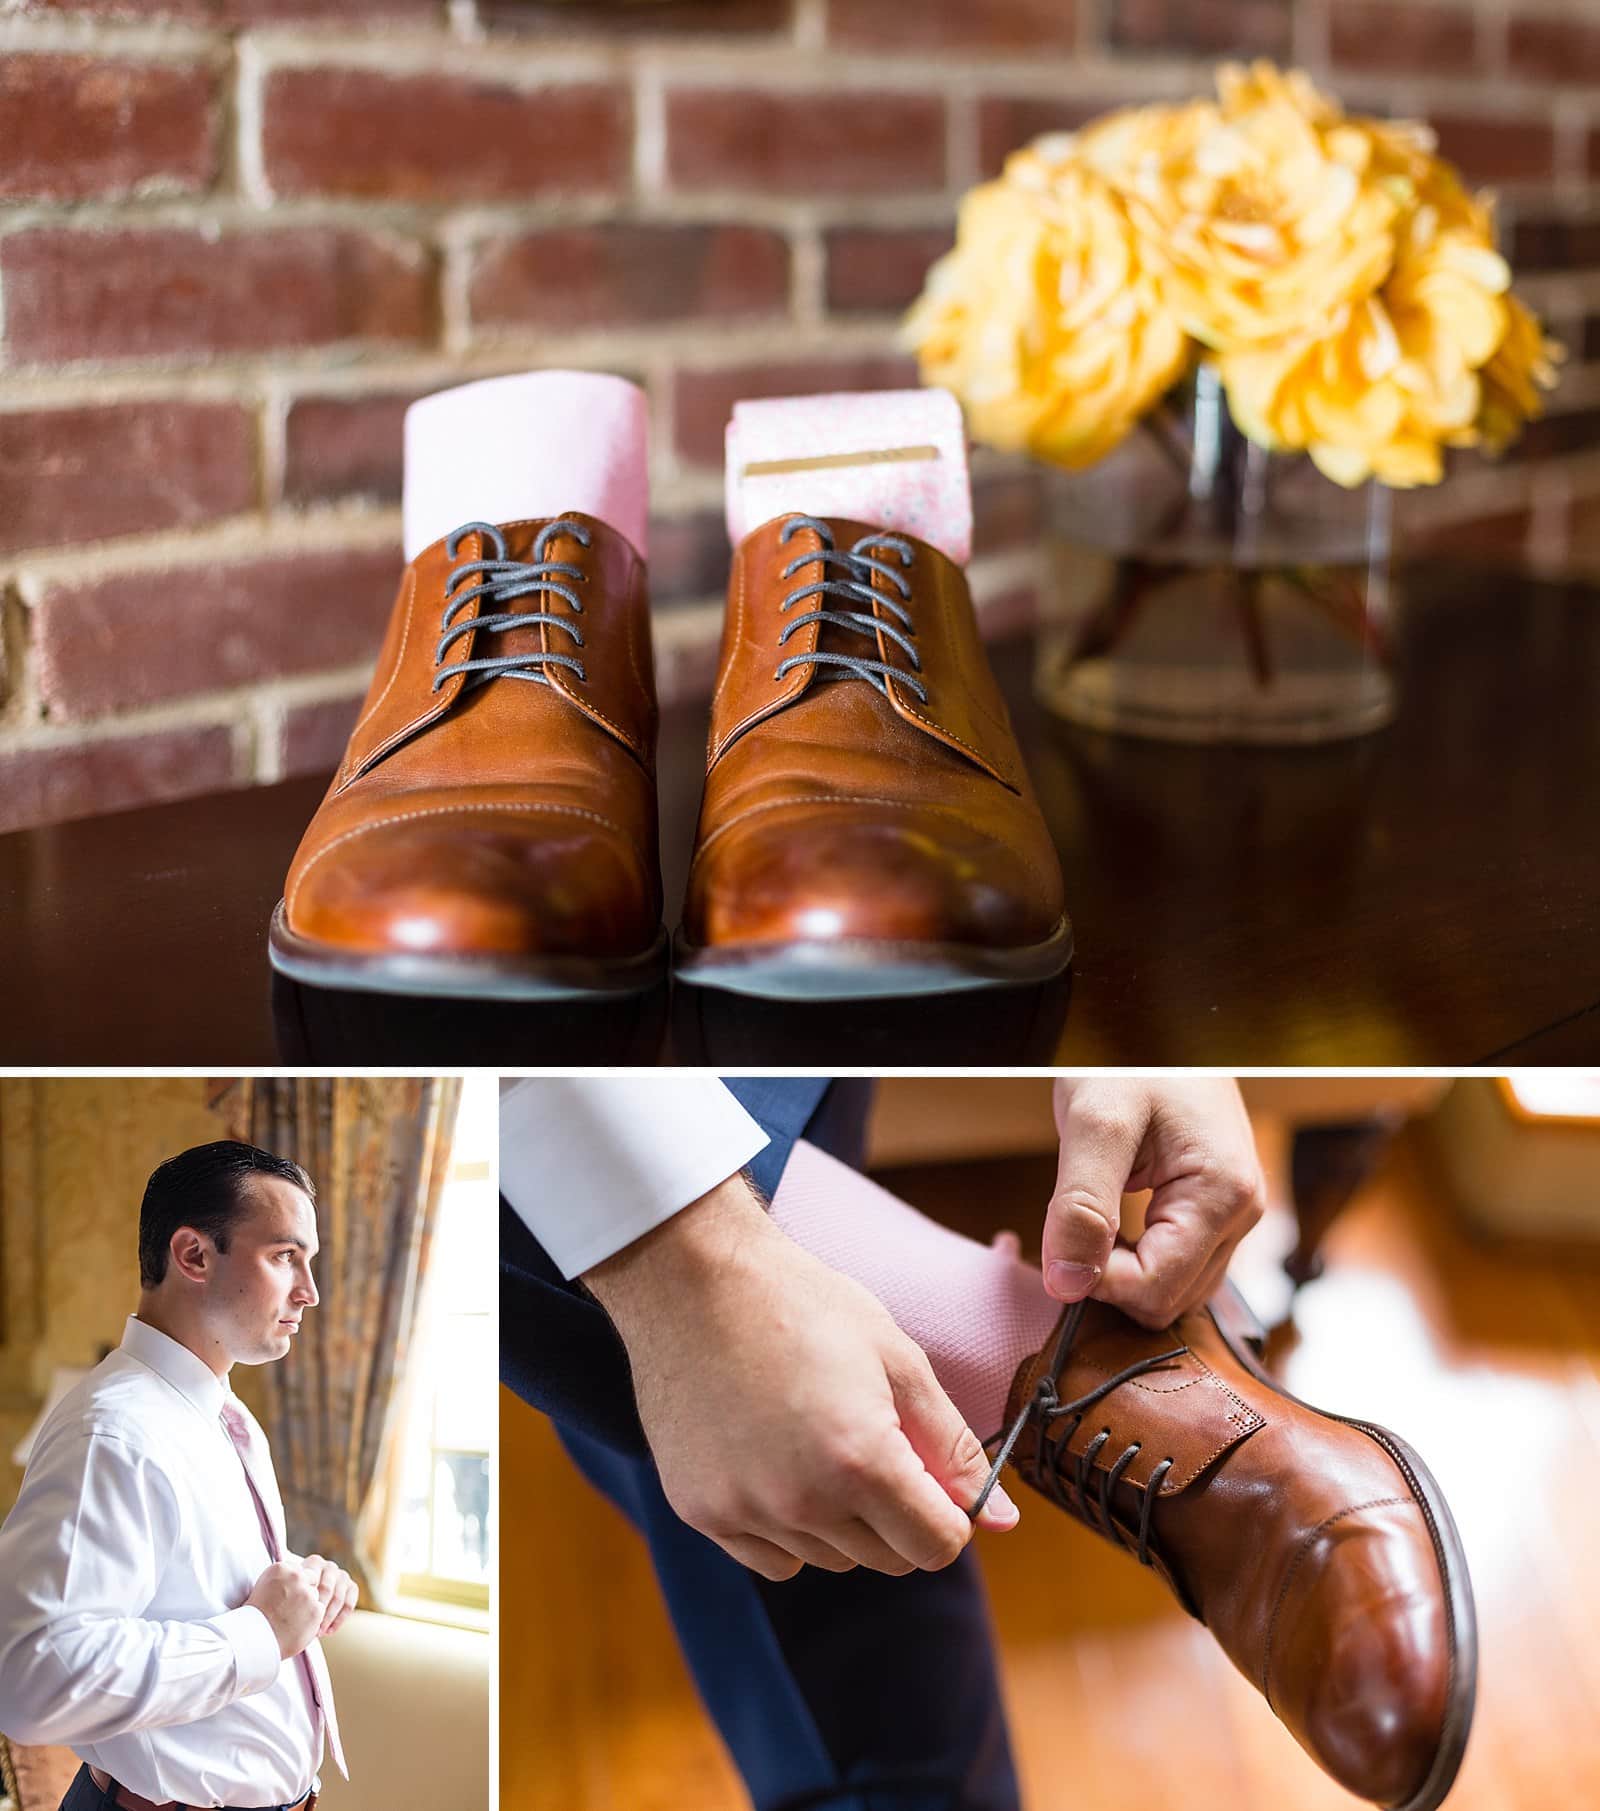 Grooms shoes and socks, groom tying his tie and shoes